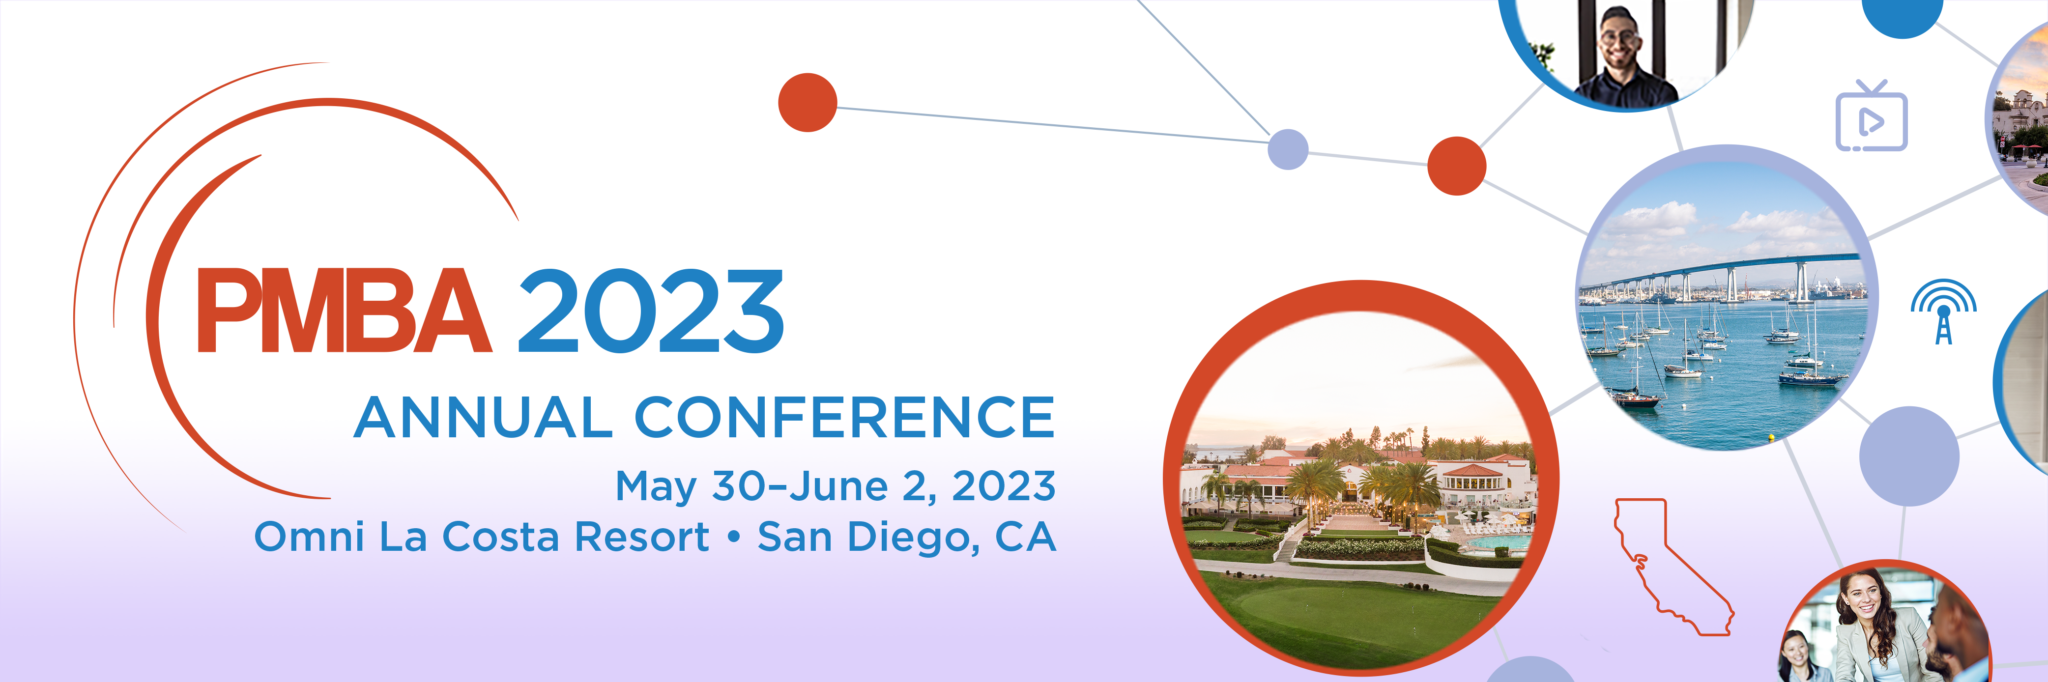 PMBA 2023 Annual Conference